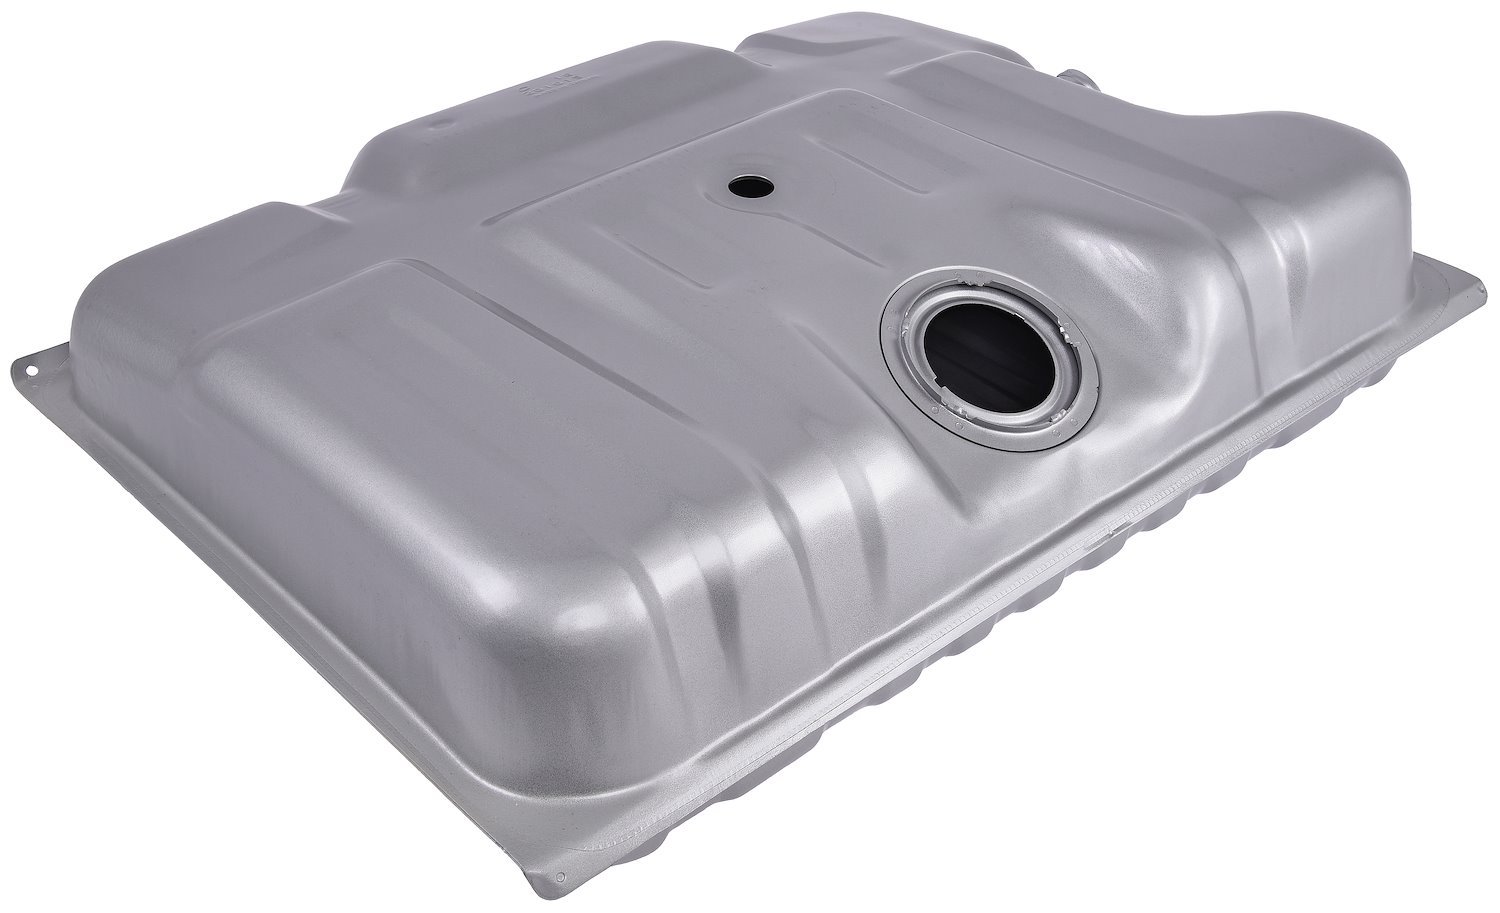 Fuel Tank Compatible with FORD F-SERIES 1990-1997 Mounts Behind Rear Axle 18 Gal. 